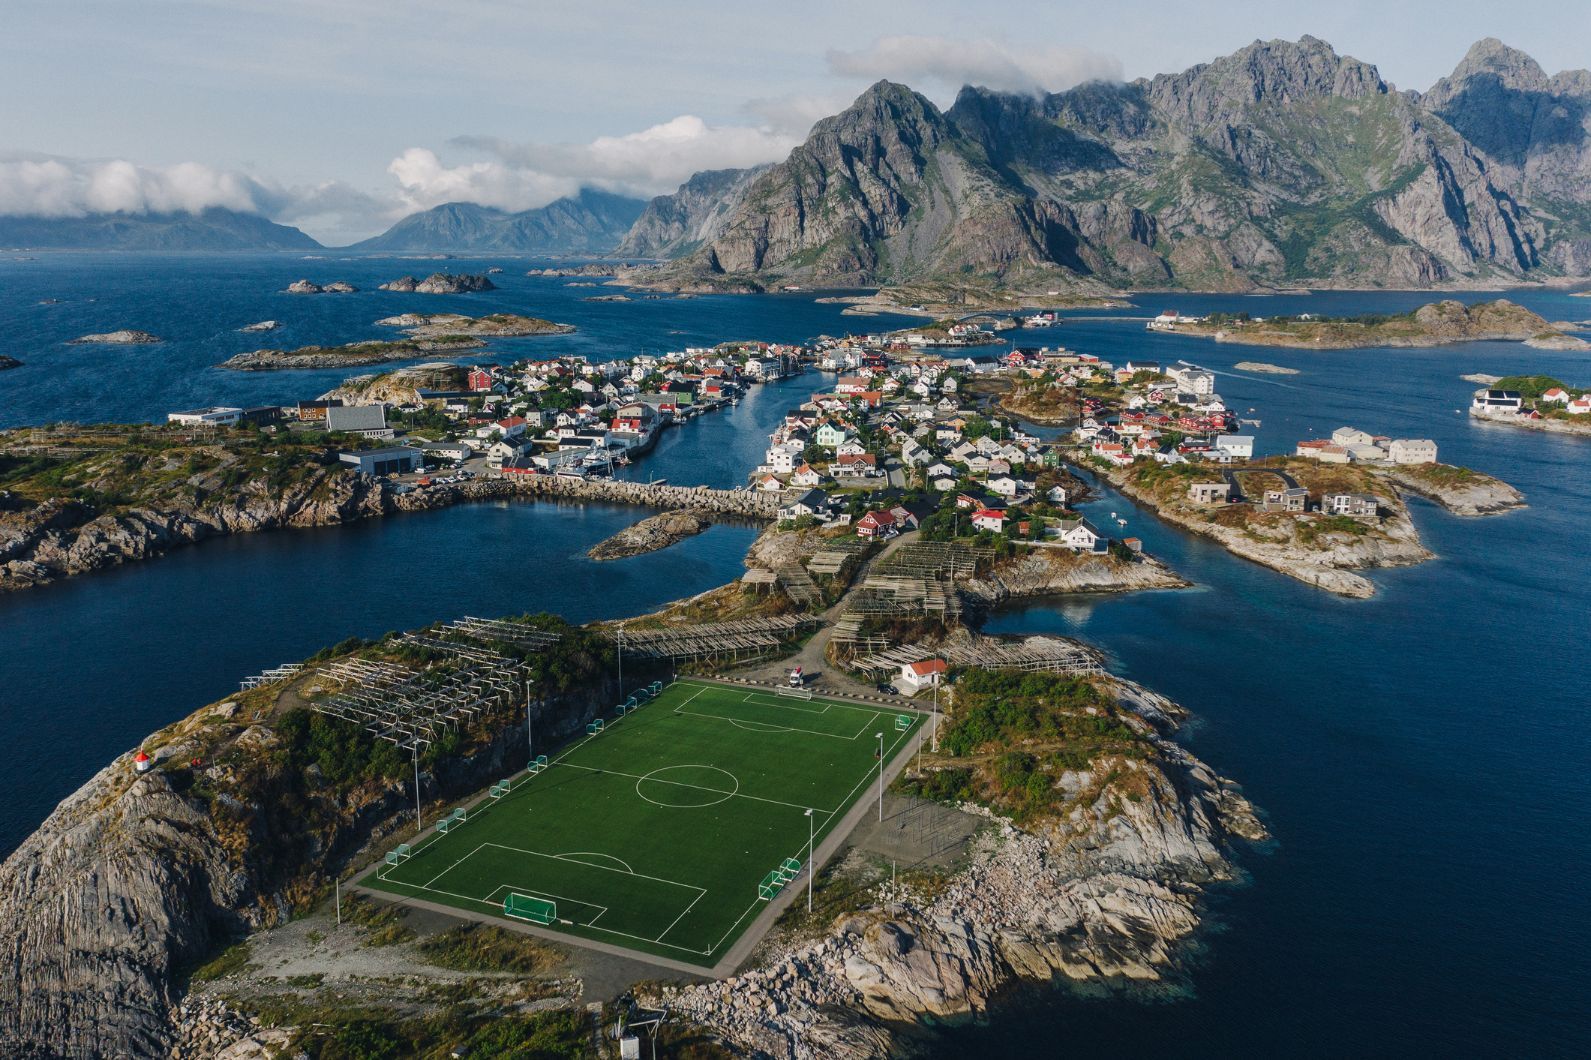 The remarkable football pitch on the Lofoten Islands, one of the most spectacular in the world